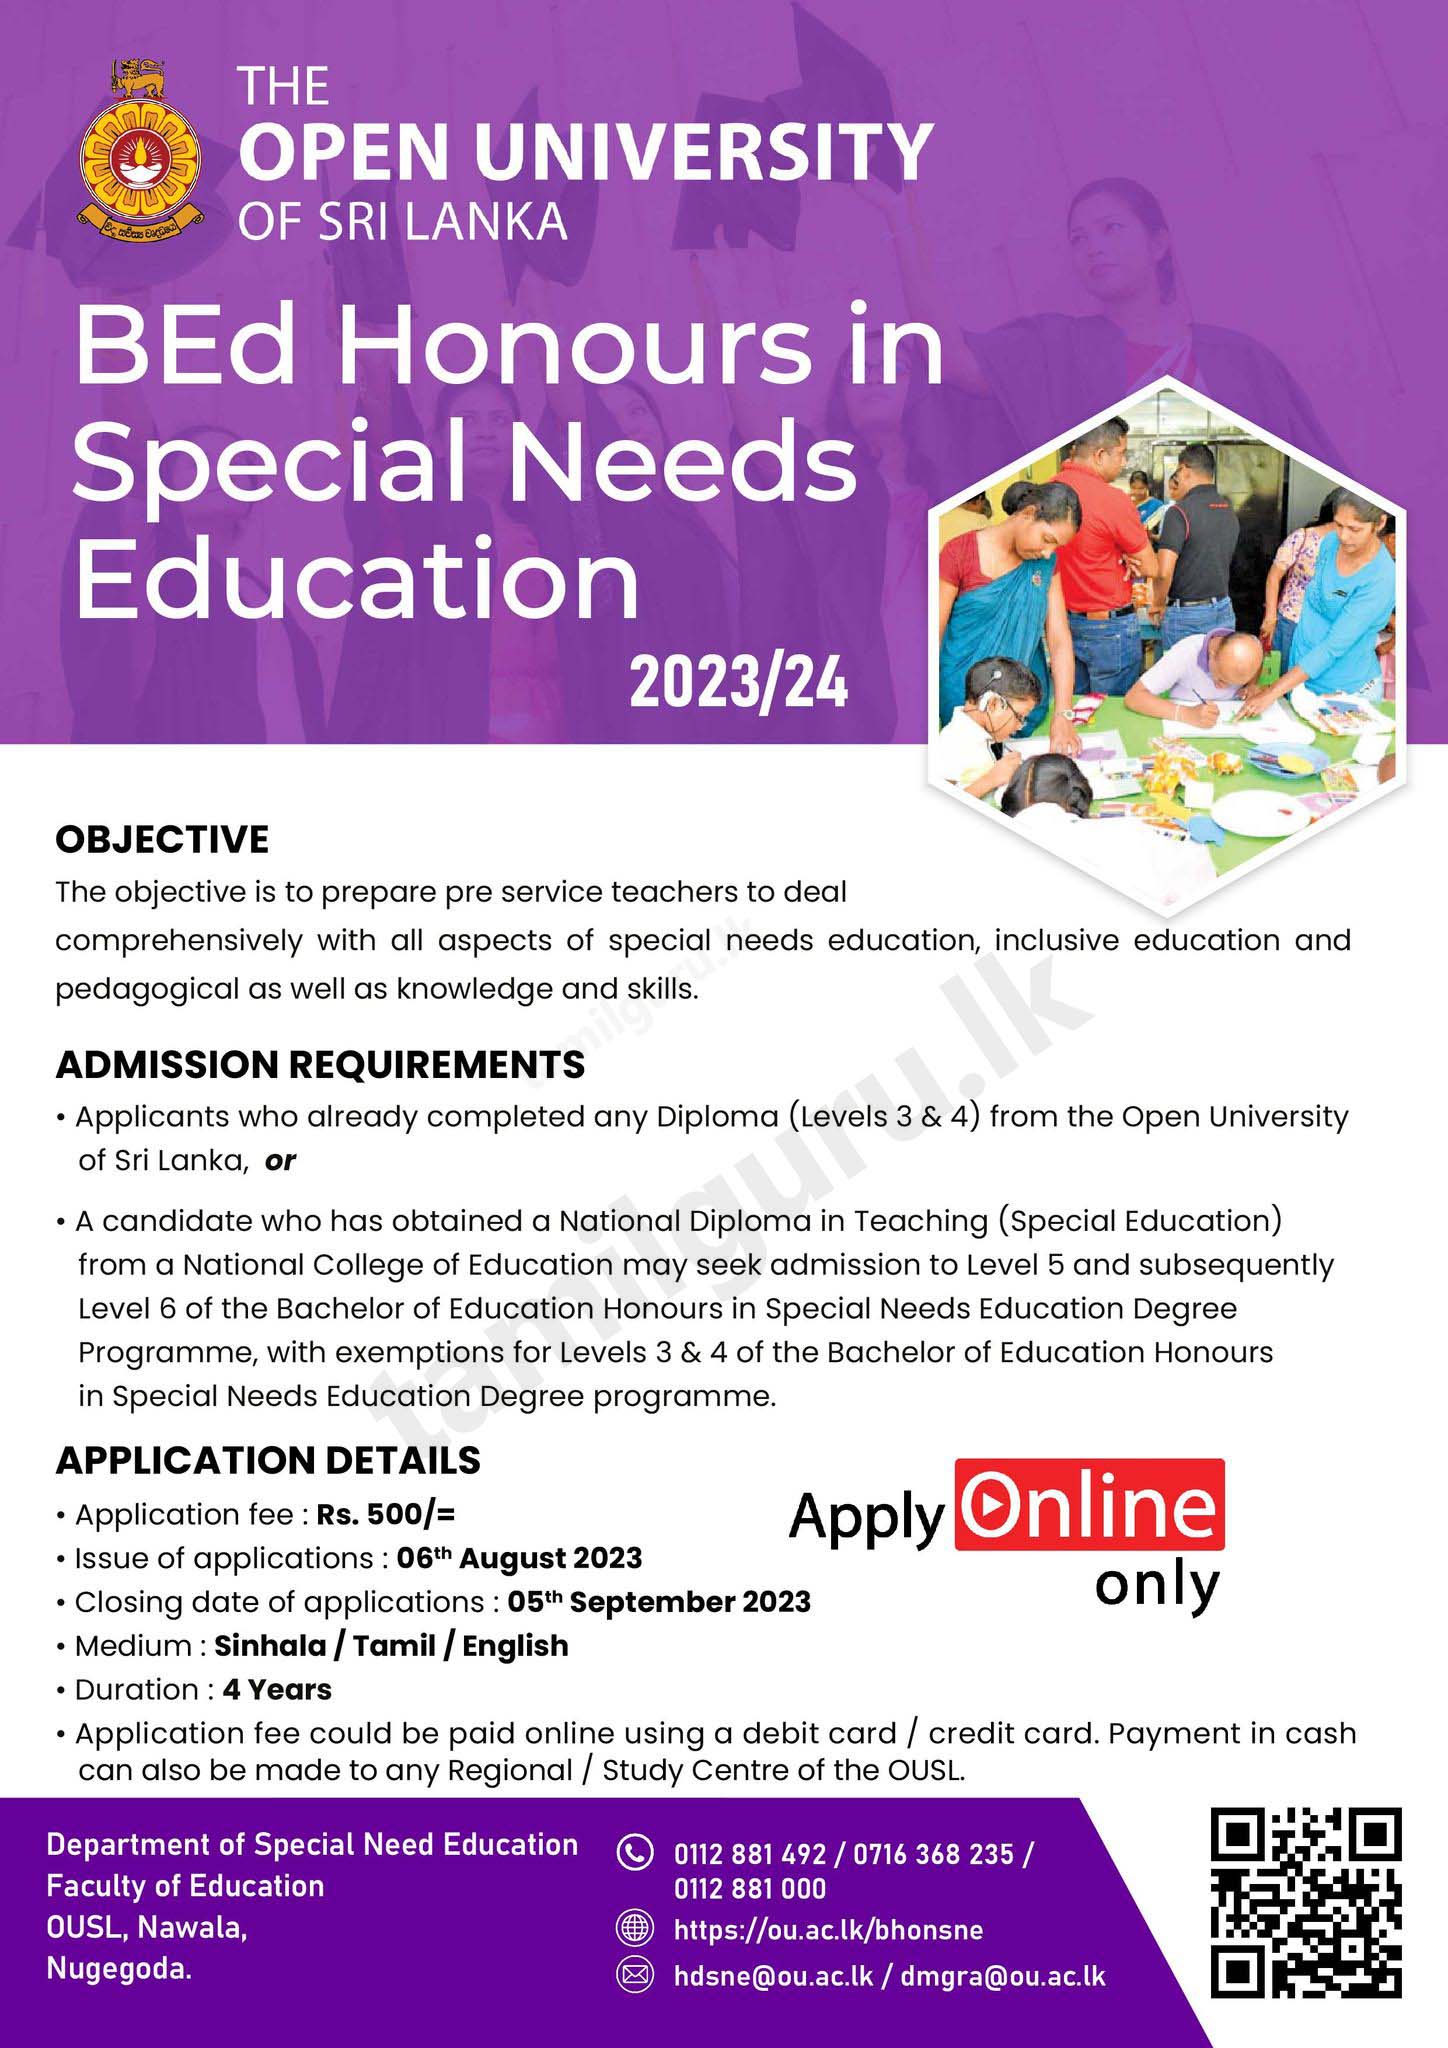 B.Ed (Hons) in Special Needs Education Degree Programme 2023/24 - Open University (OUSL)